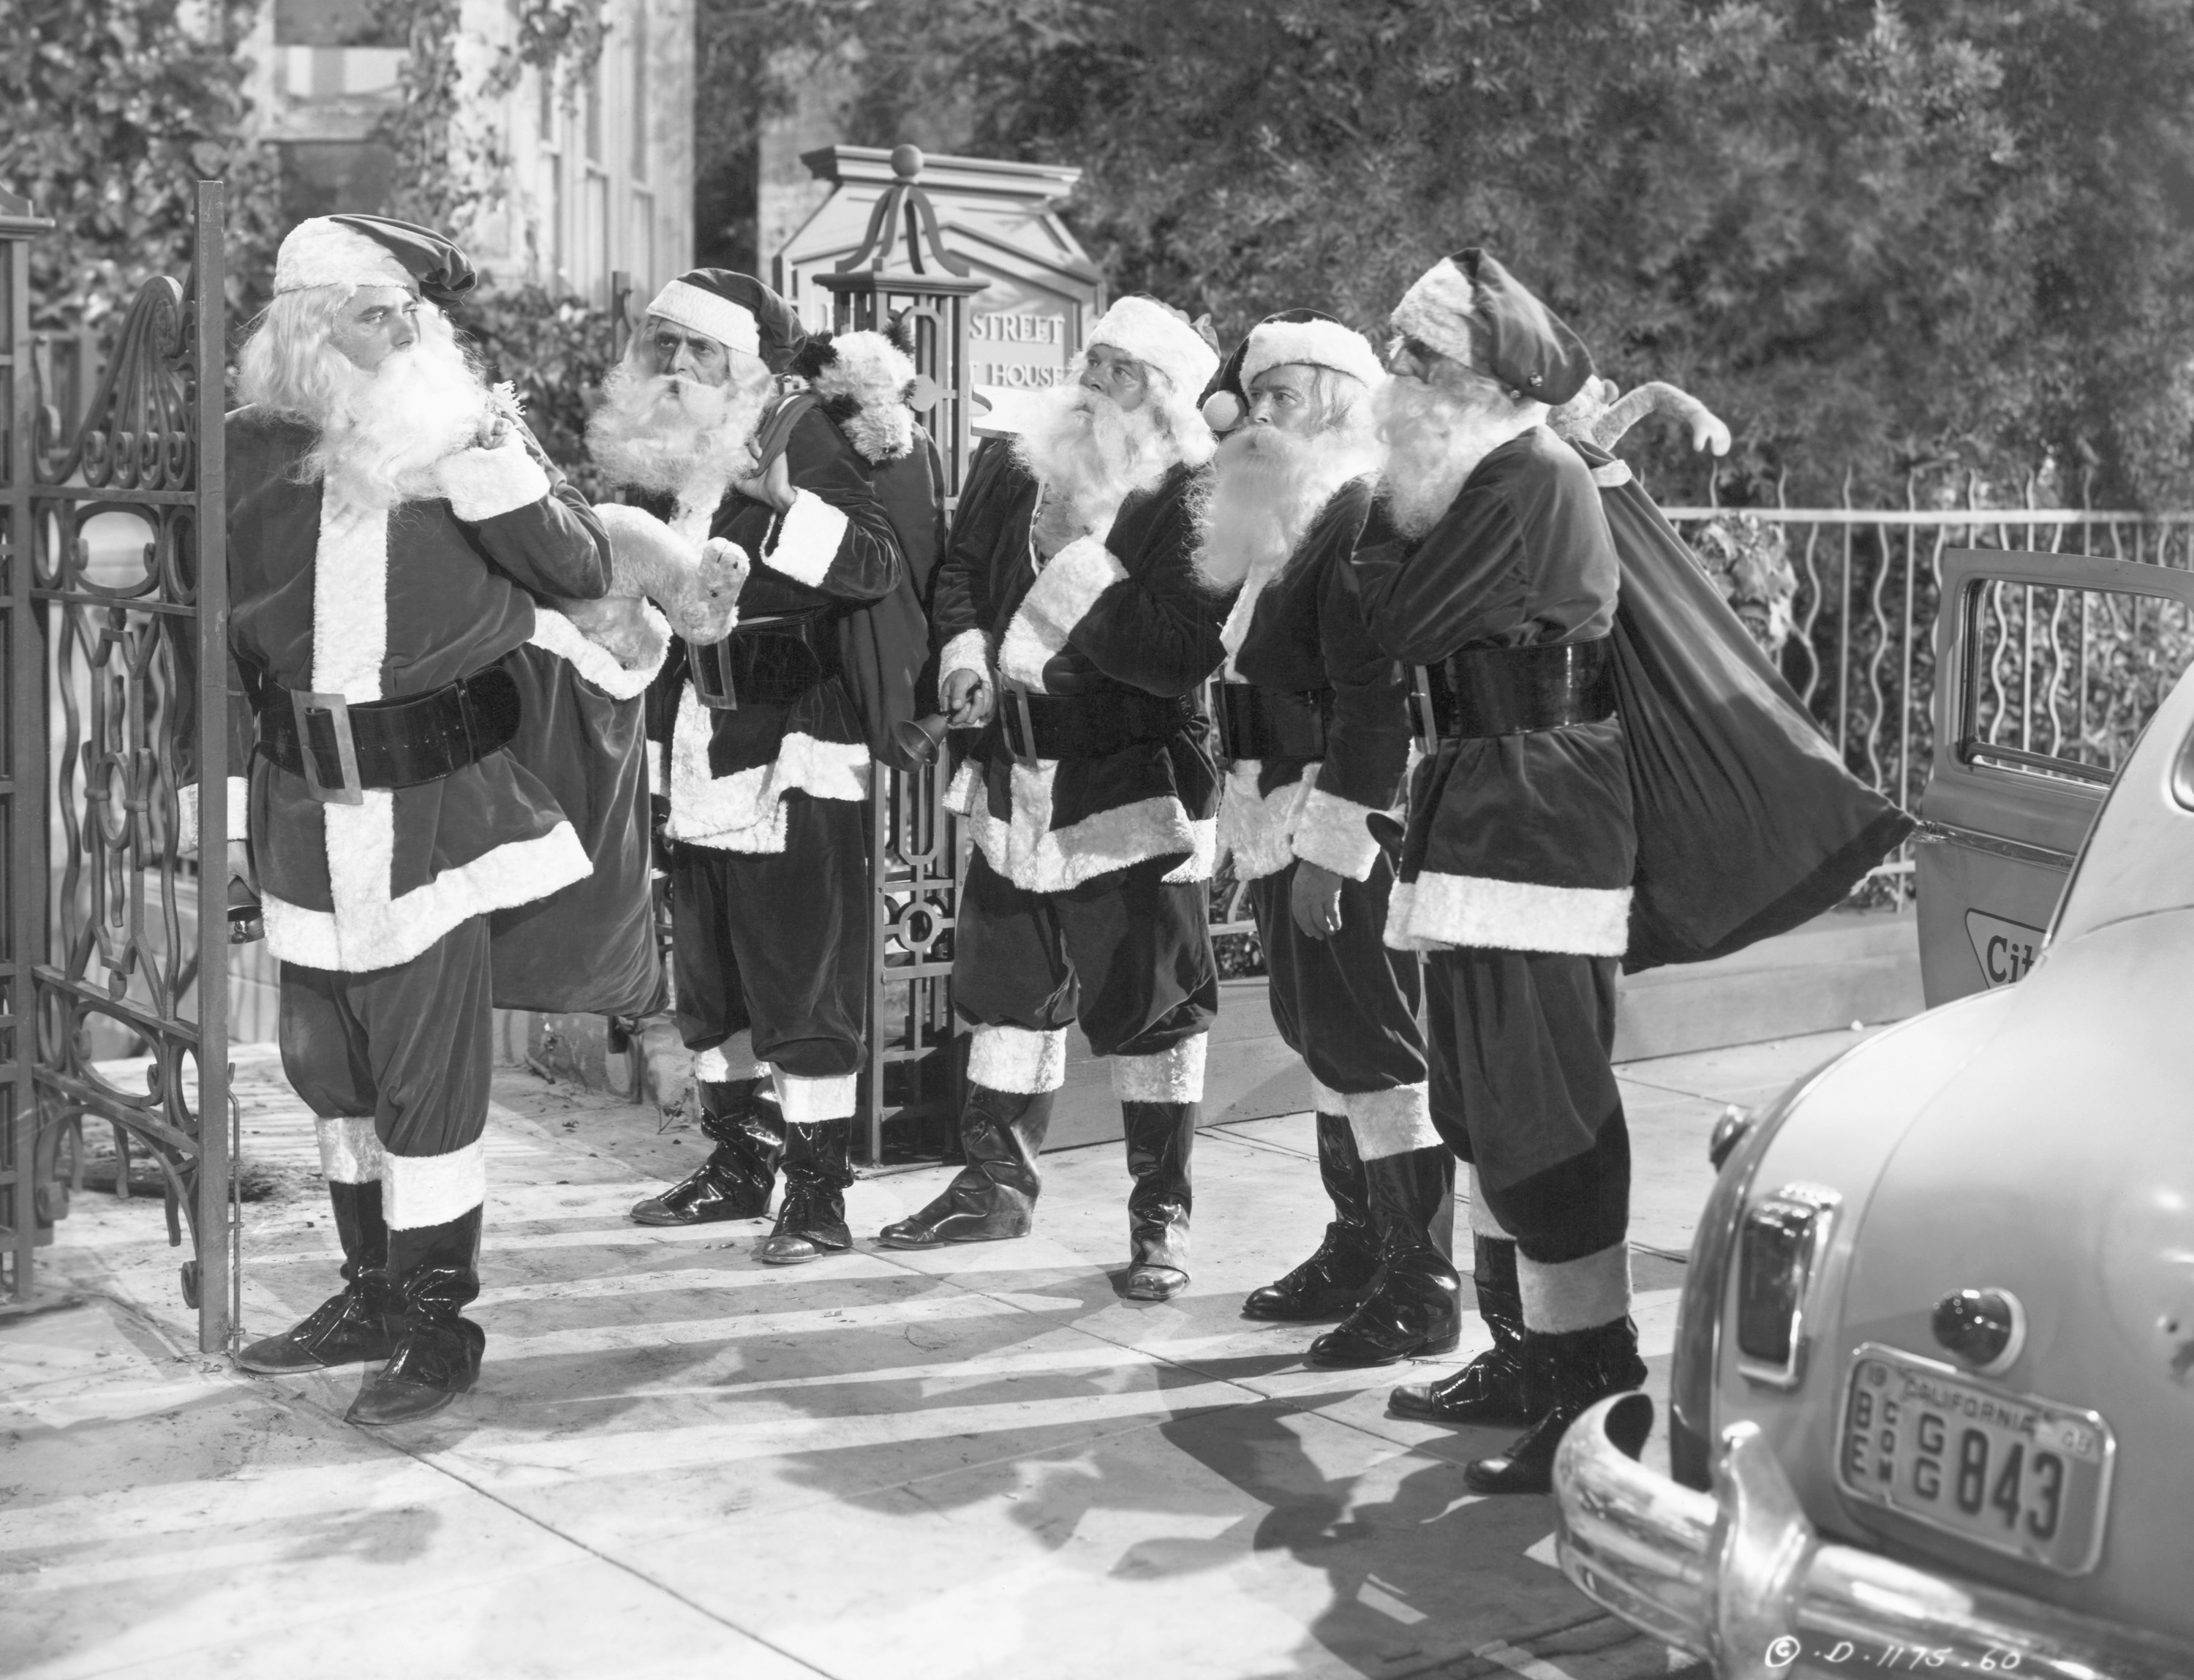 Glenn Ford dressed as Santa Claus in the 1949 film Mr. Soft Touch